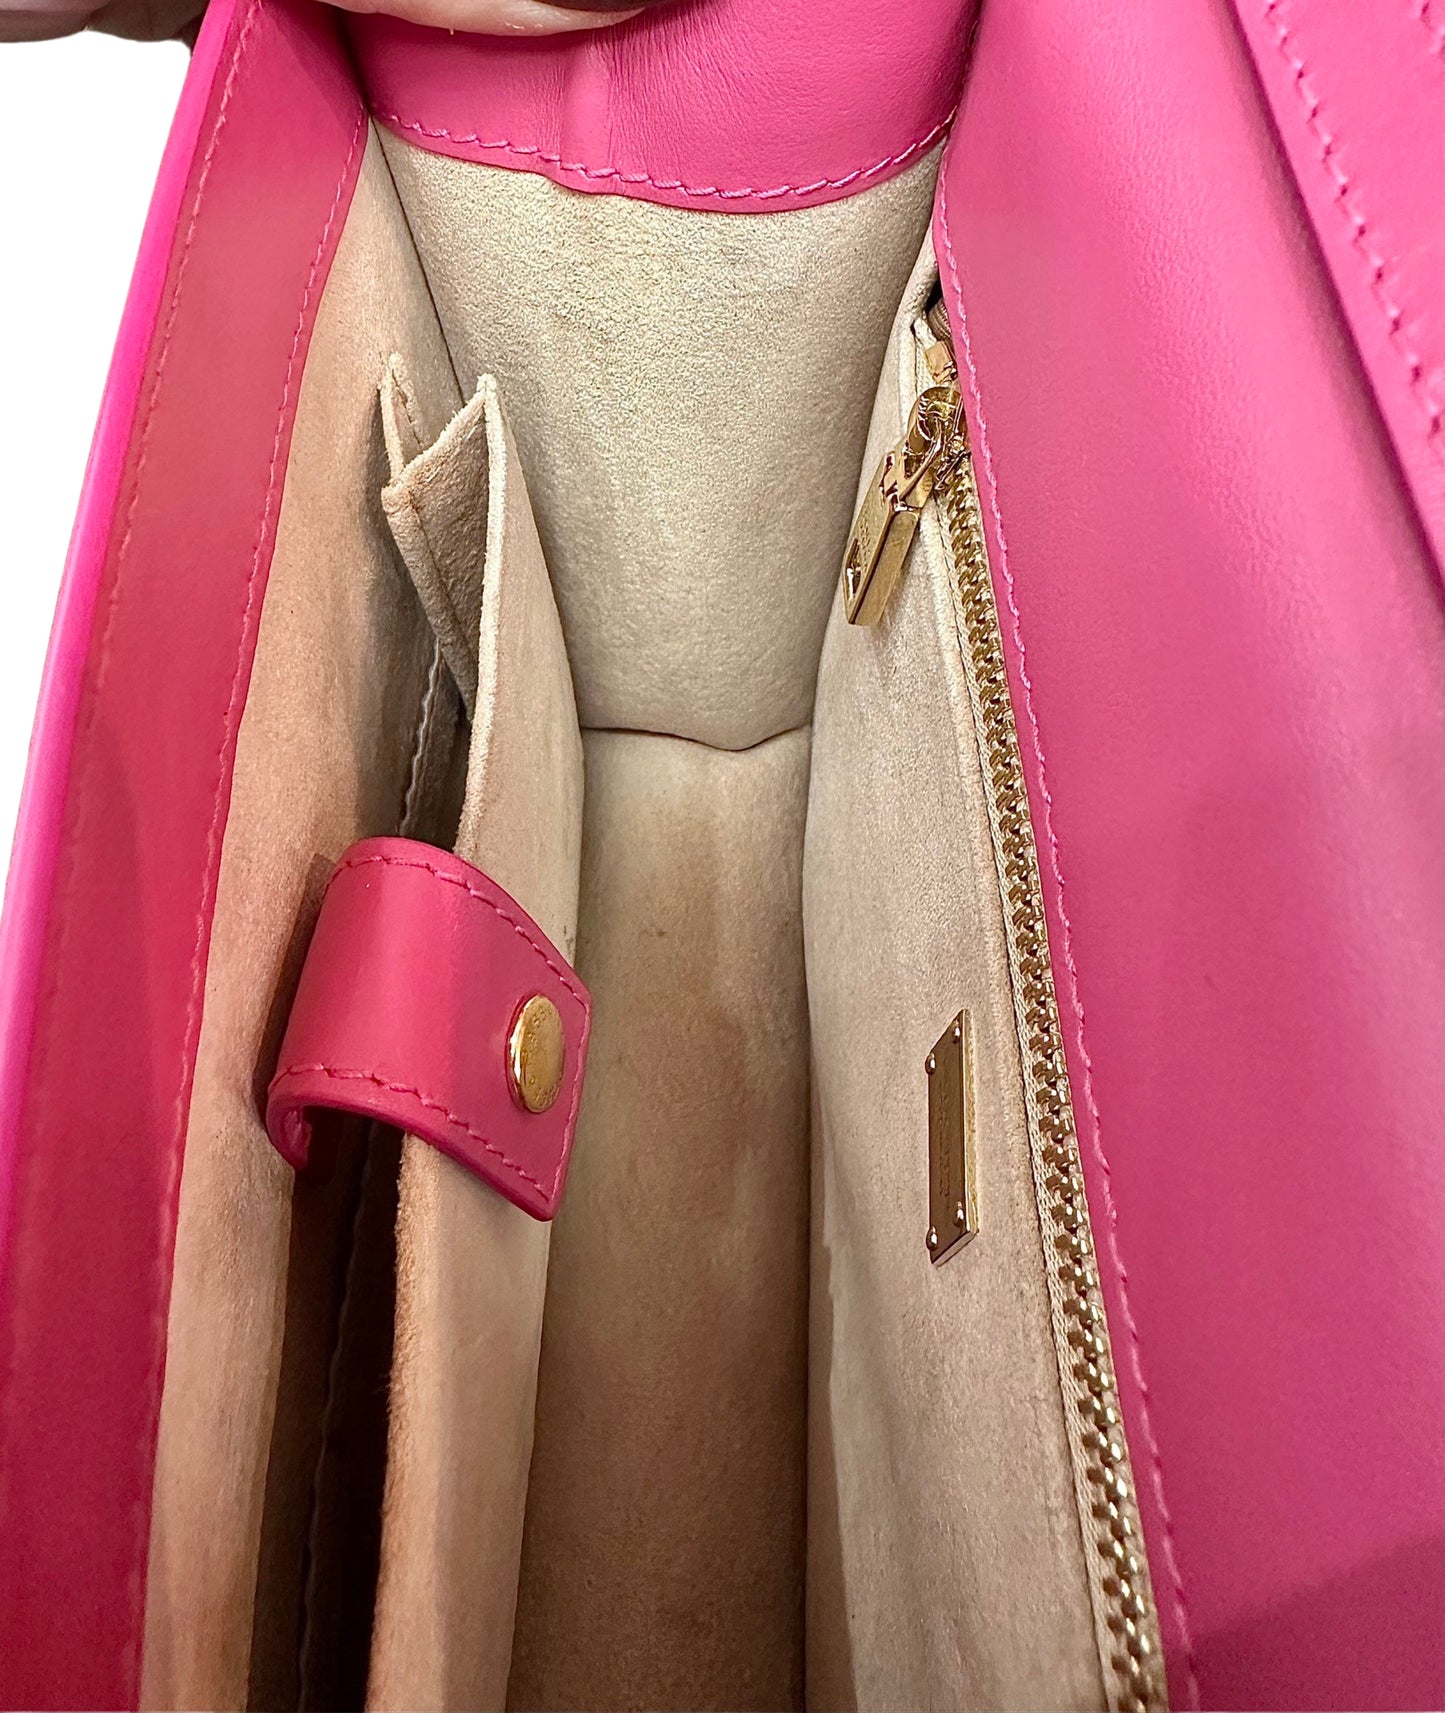 Photo showing the side of the interior bag